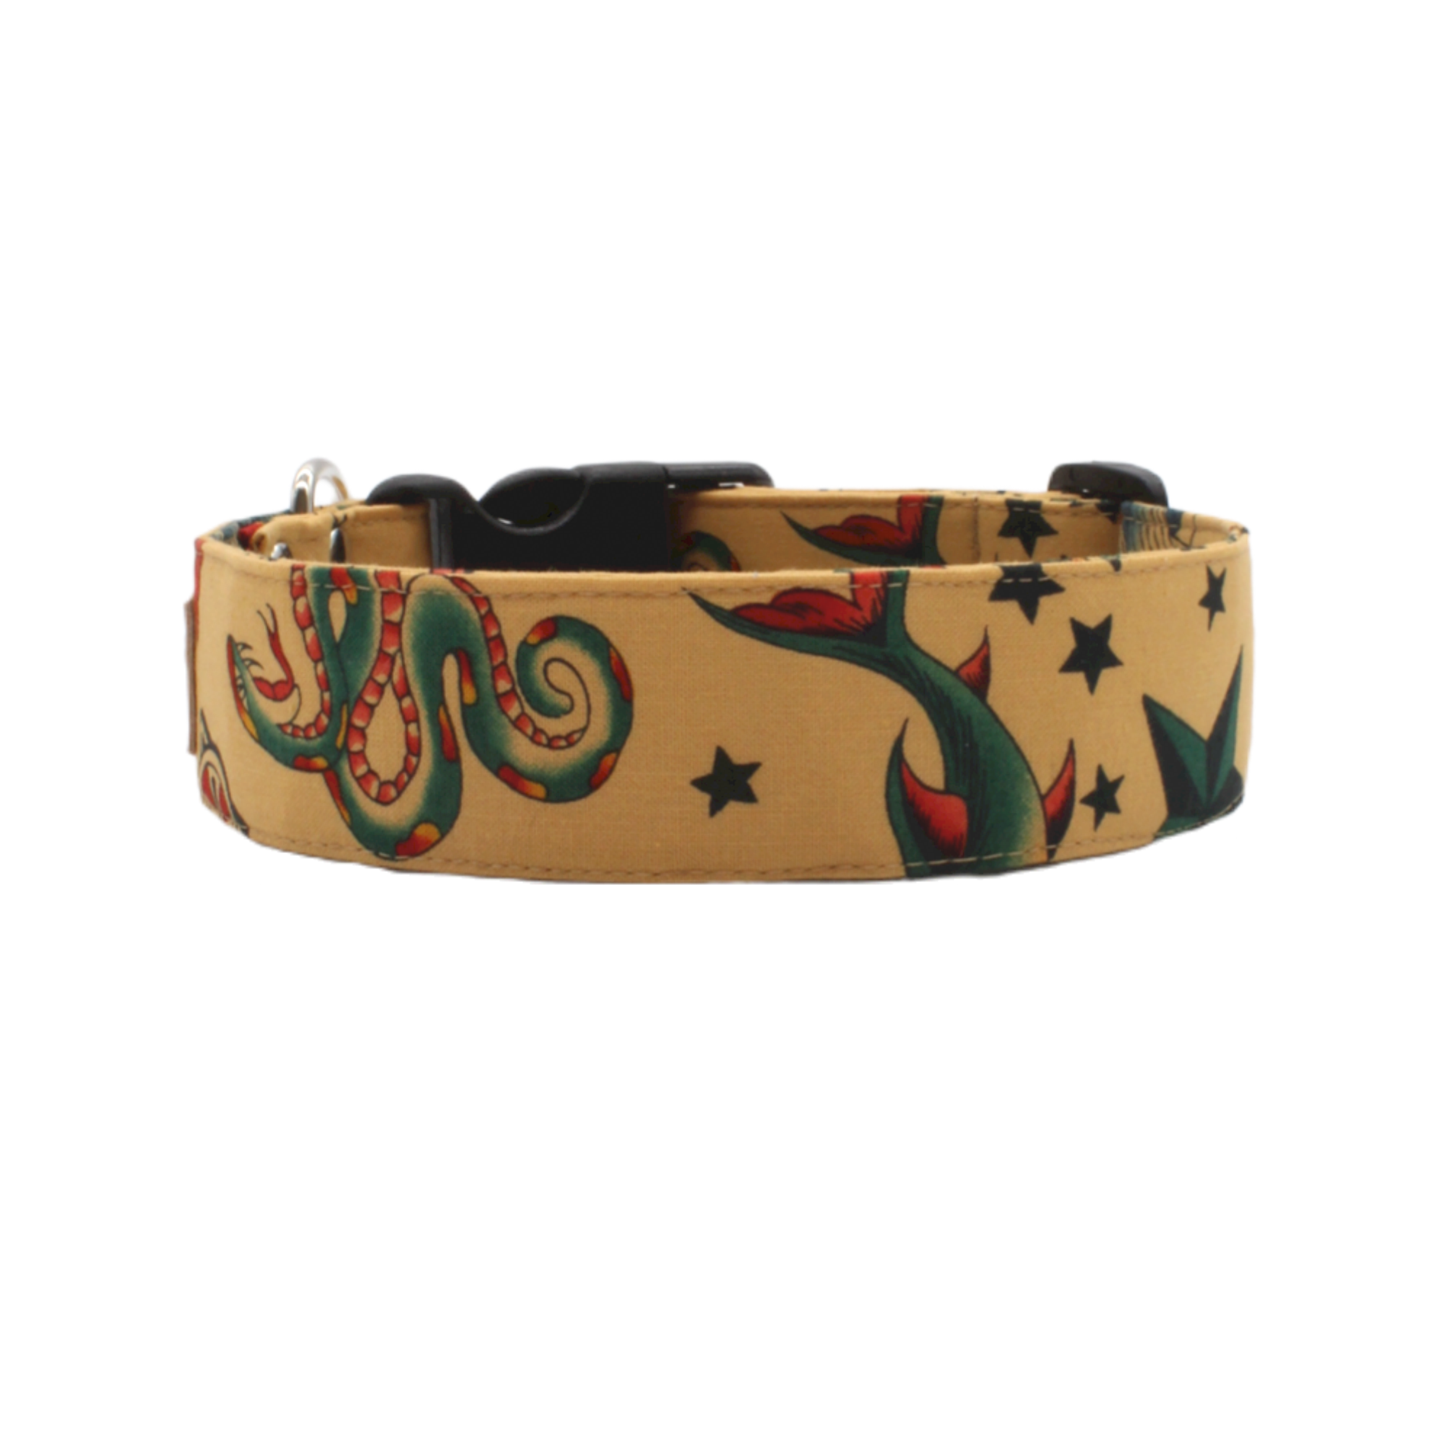 Vintage tattoo style dog collar - The Jerry